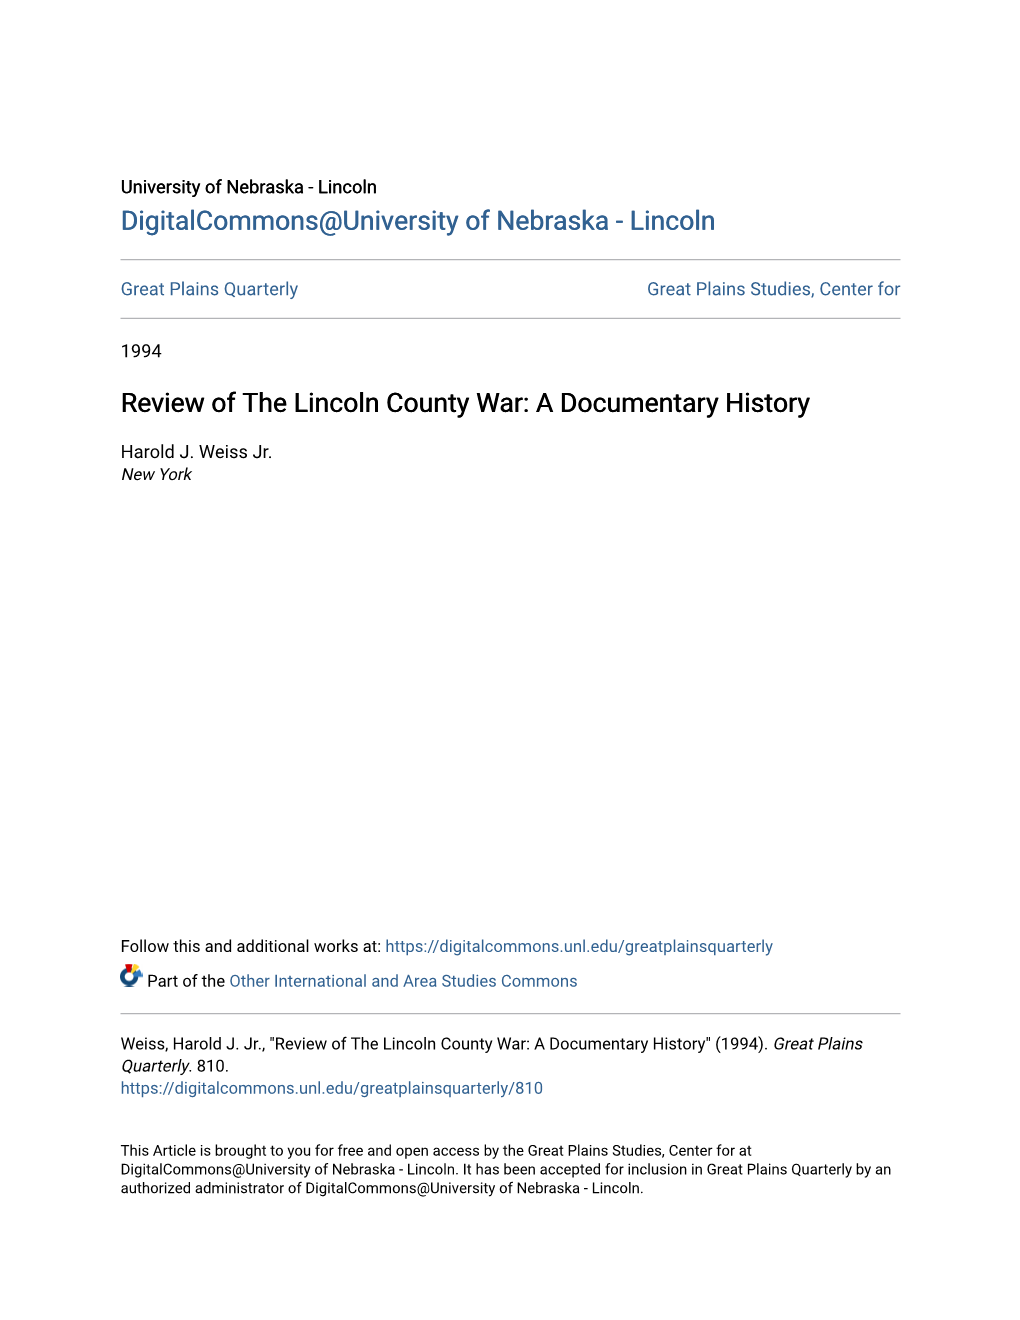 Review of the Lincoln County War: a Documentary History